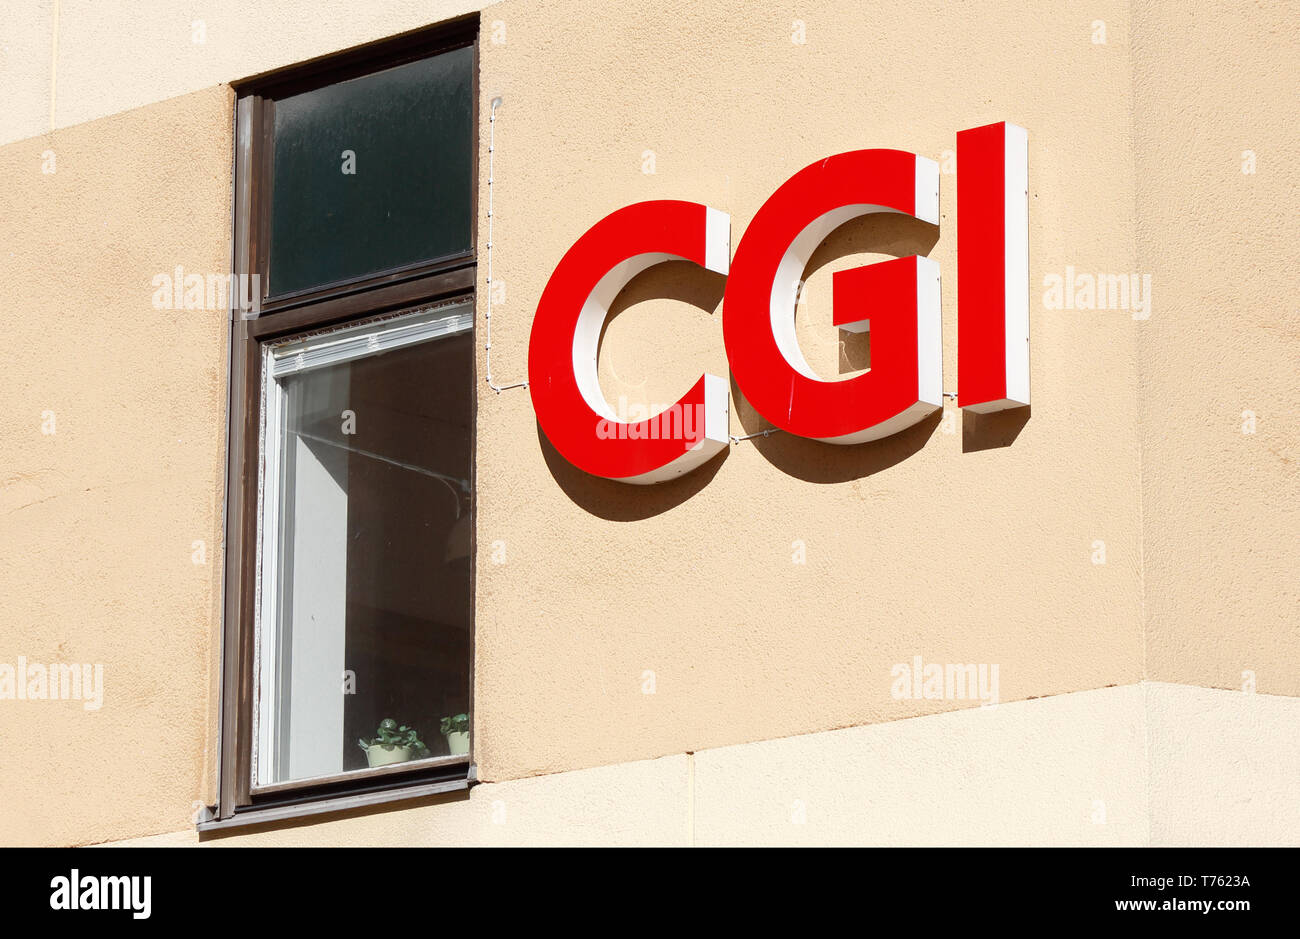 Orebro, Sweden - April 17, 2019: Close-up of the CGI IT consultant and sourcing company CGI. Stock Photo